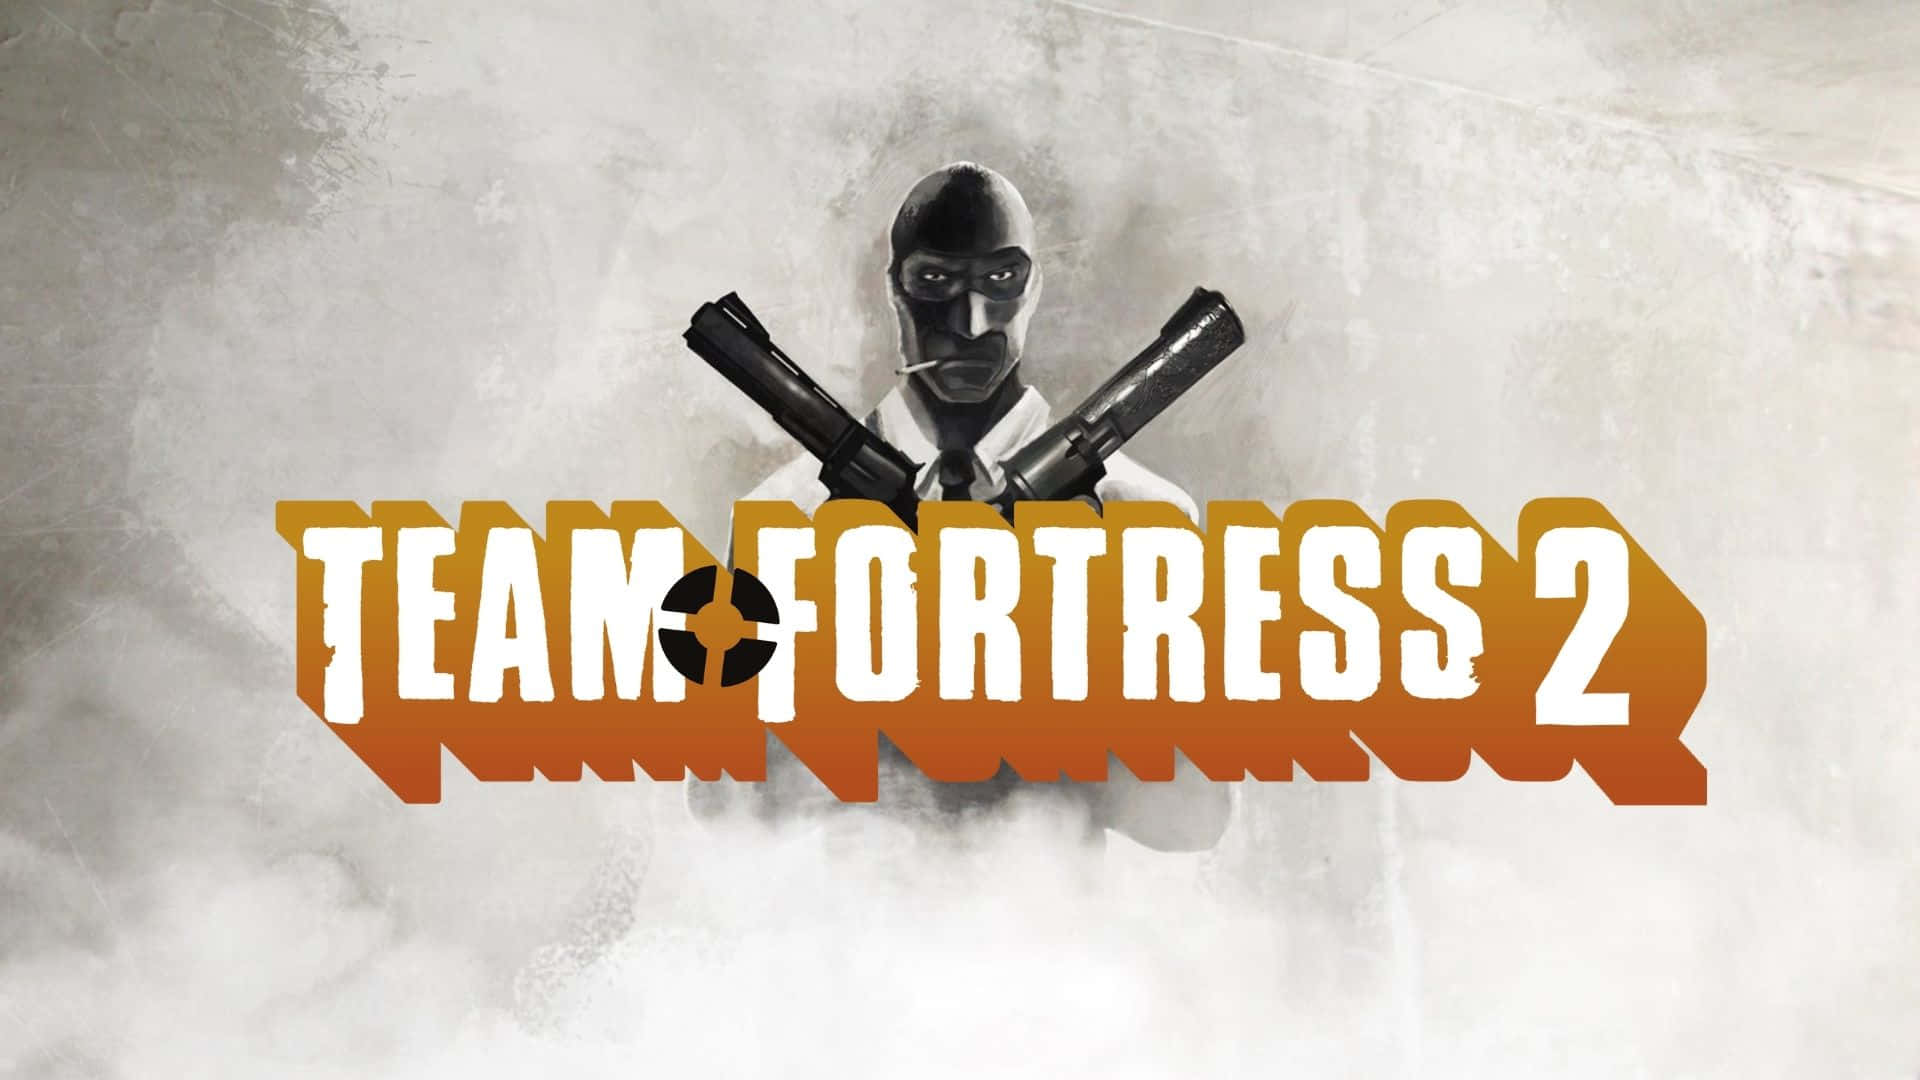 Install a 1920x1080 Tf2 Wallpaper to immerse yourself in the game.